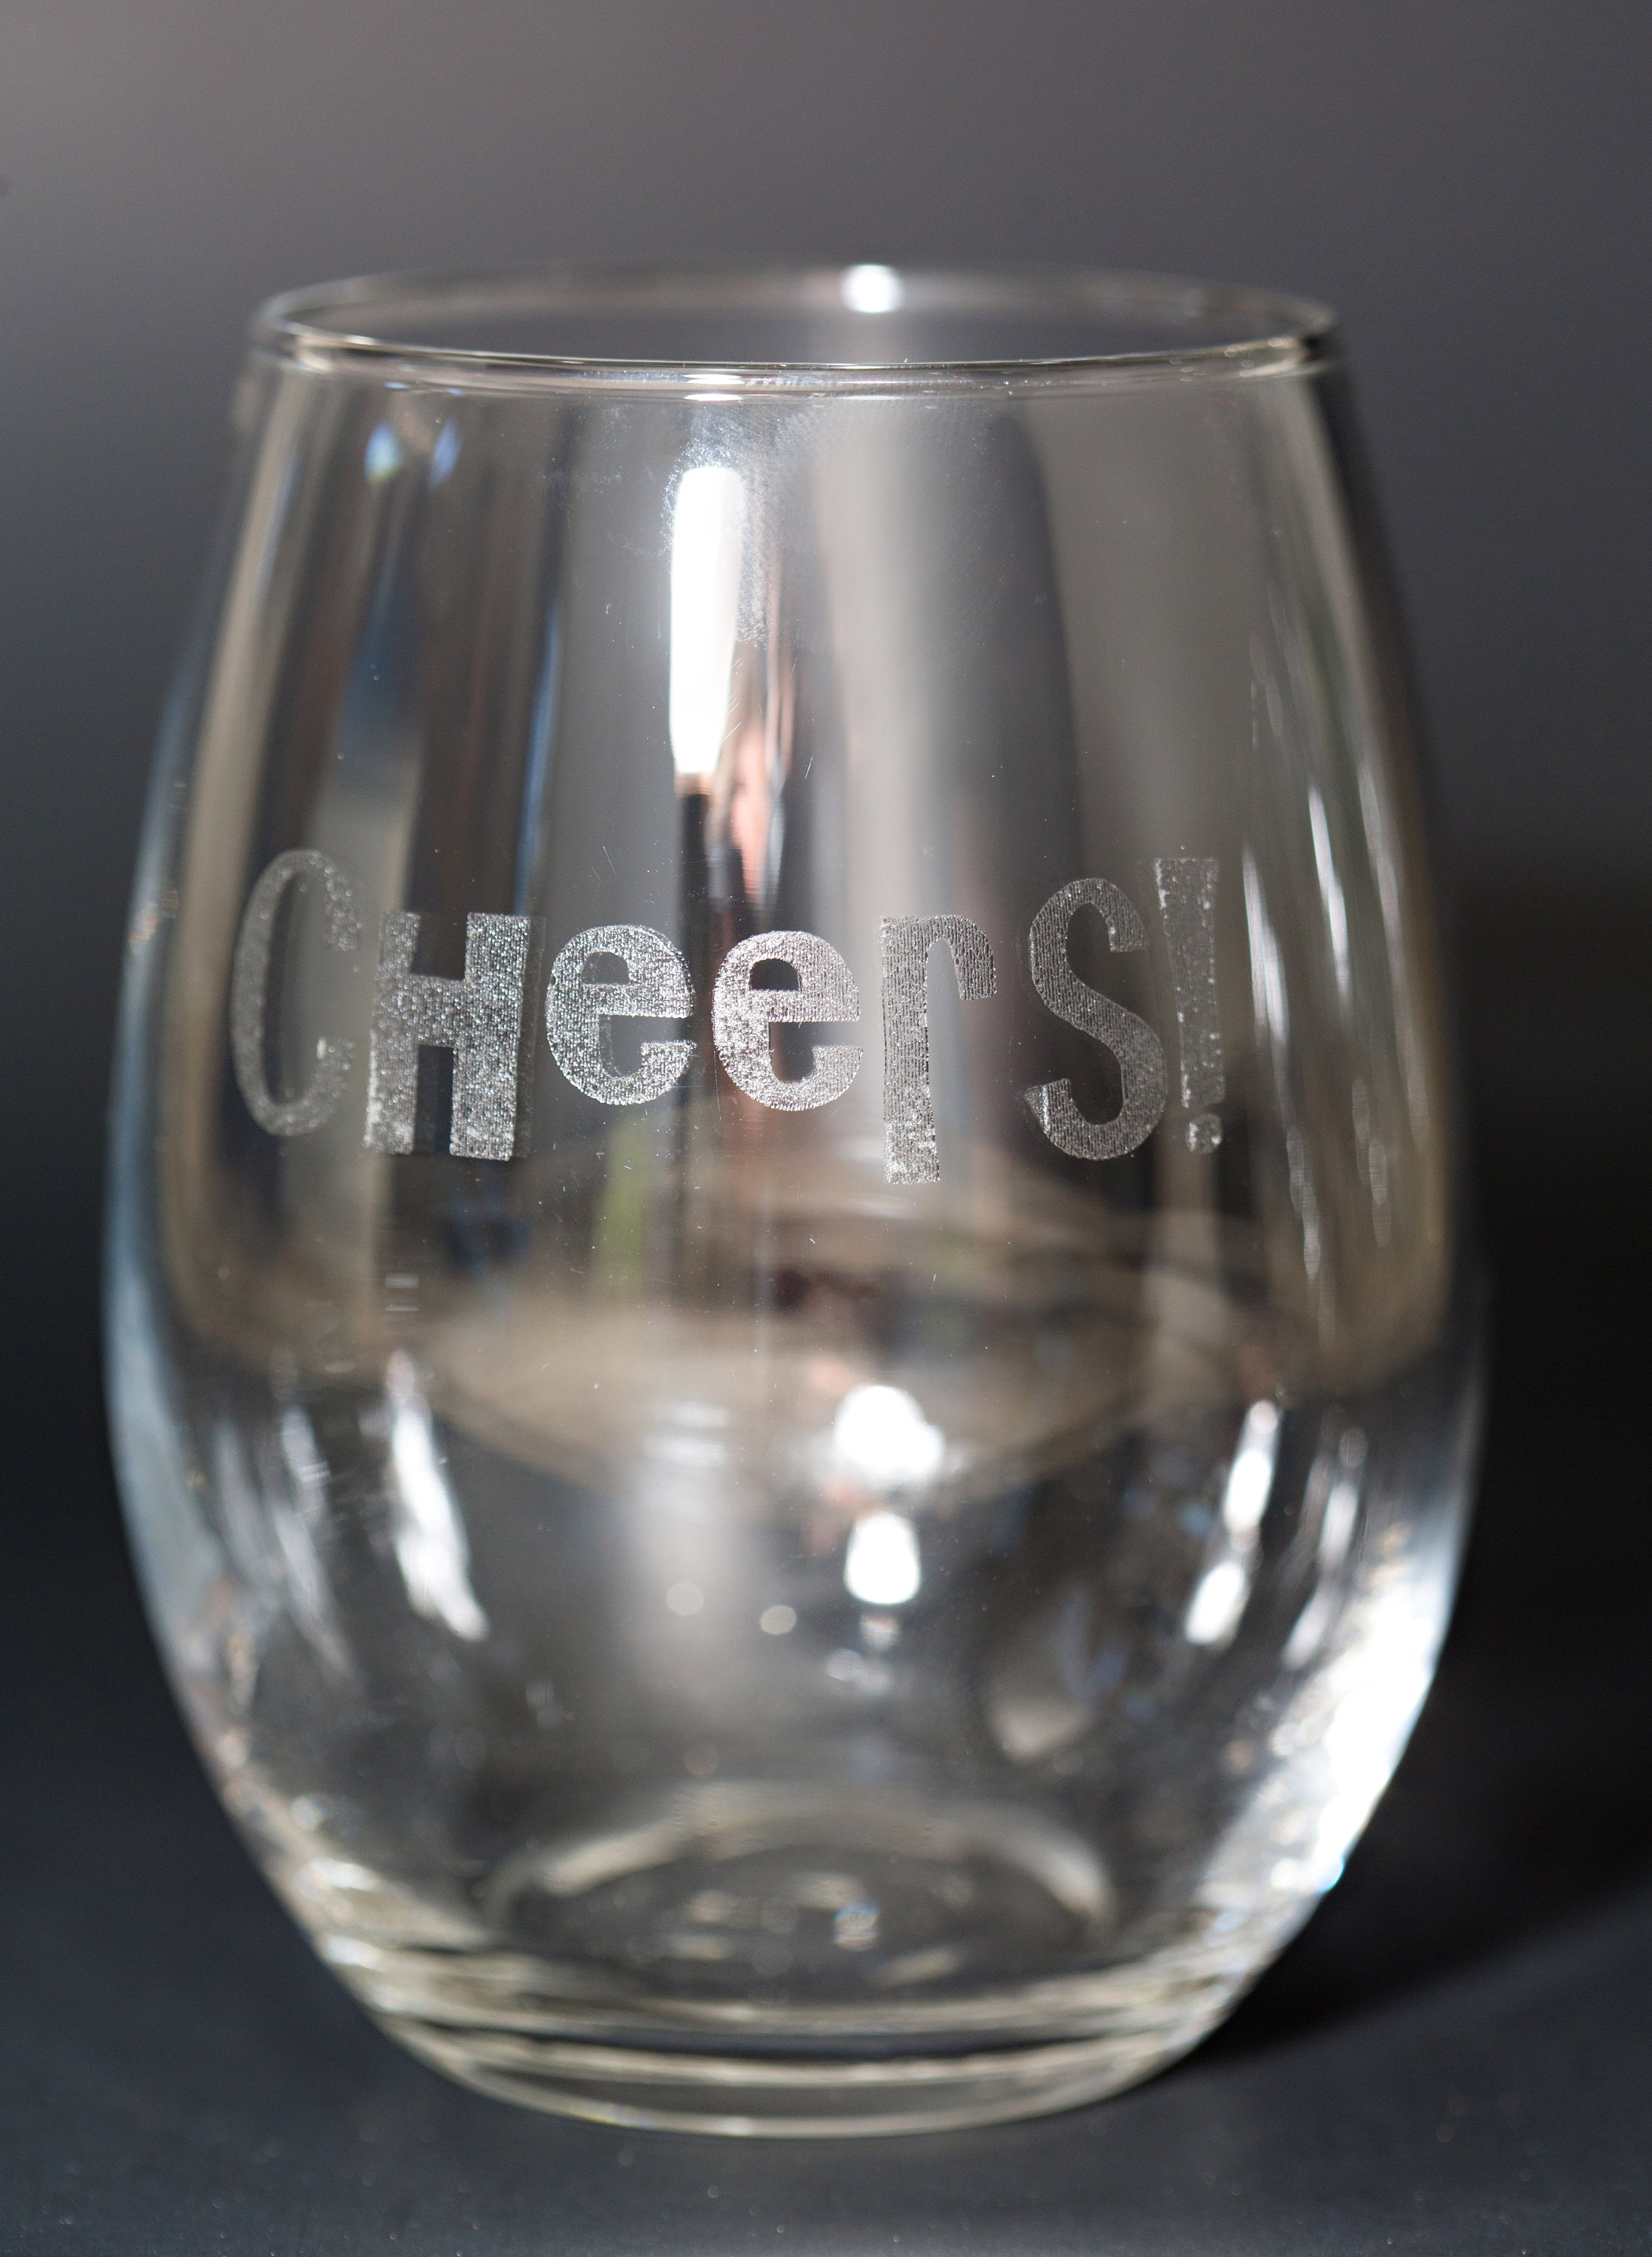 Cheers® Set of 4 Red Wine Glasses